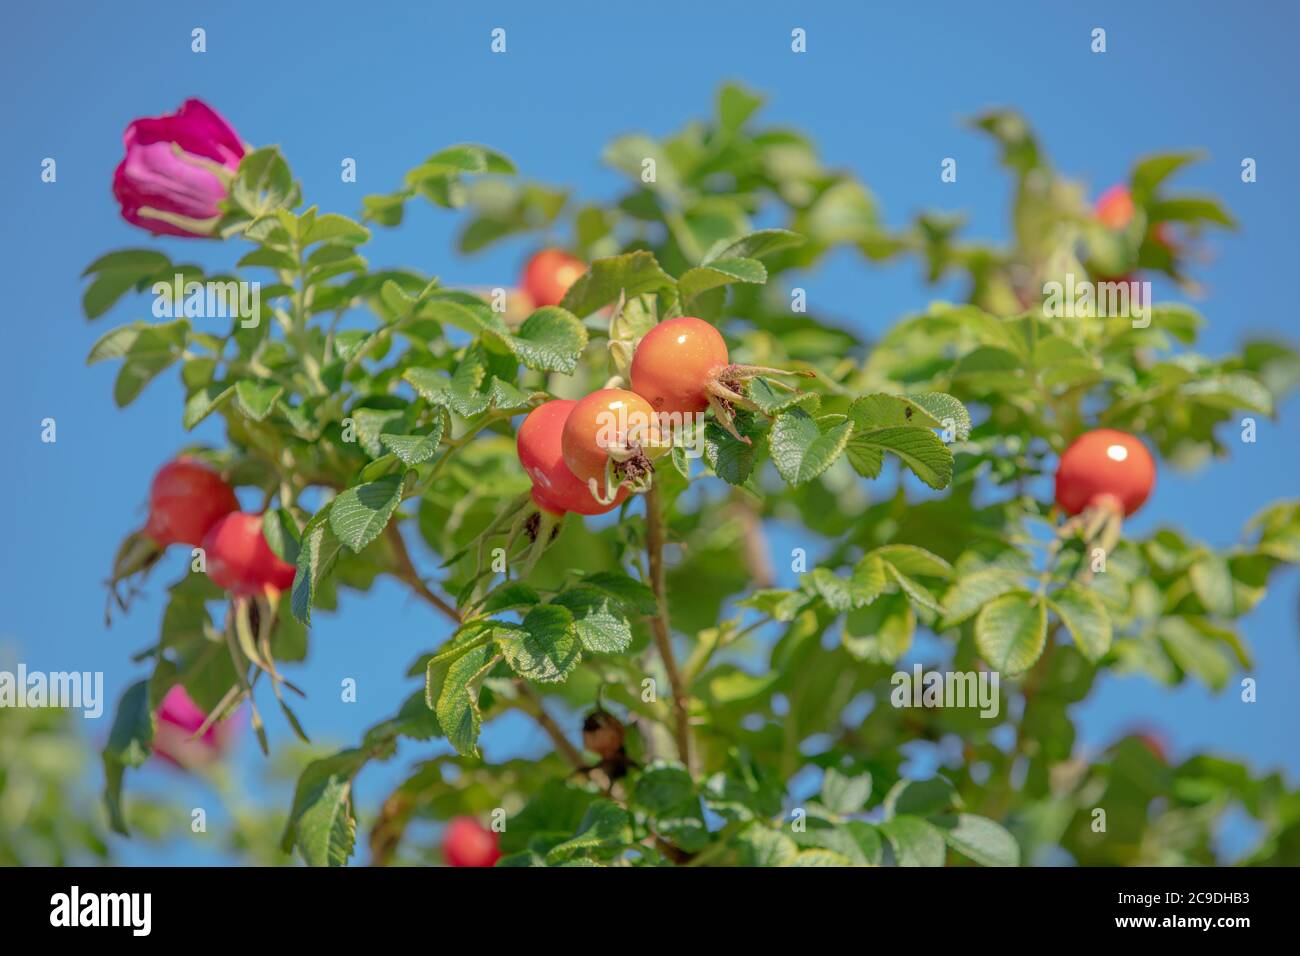 Orange red rose hips and leaves of Rosa rugosa rubra seen against a background of the blue sky in summer. Stock Photo